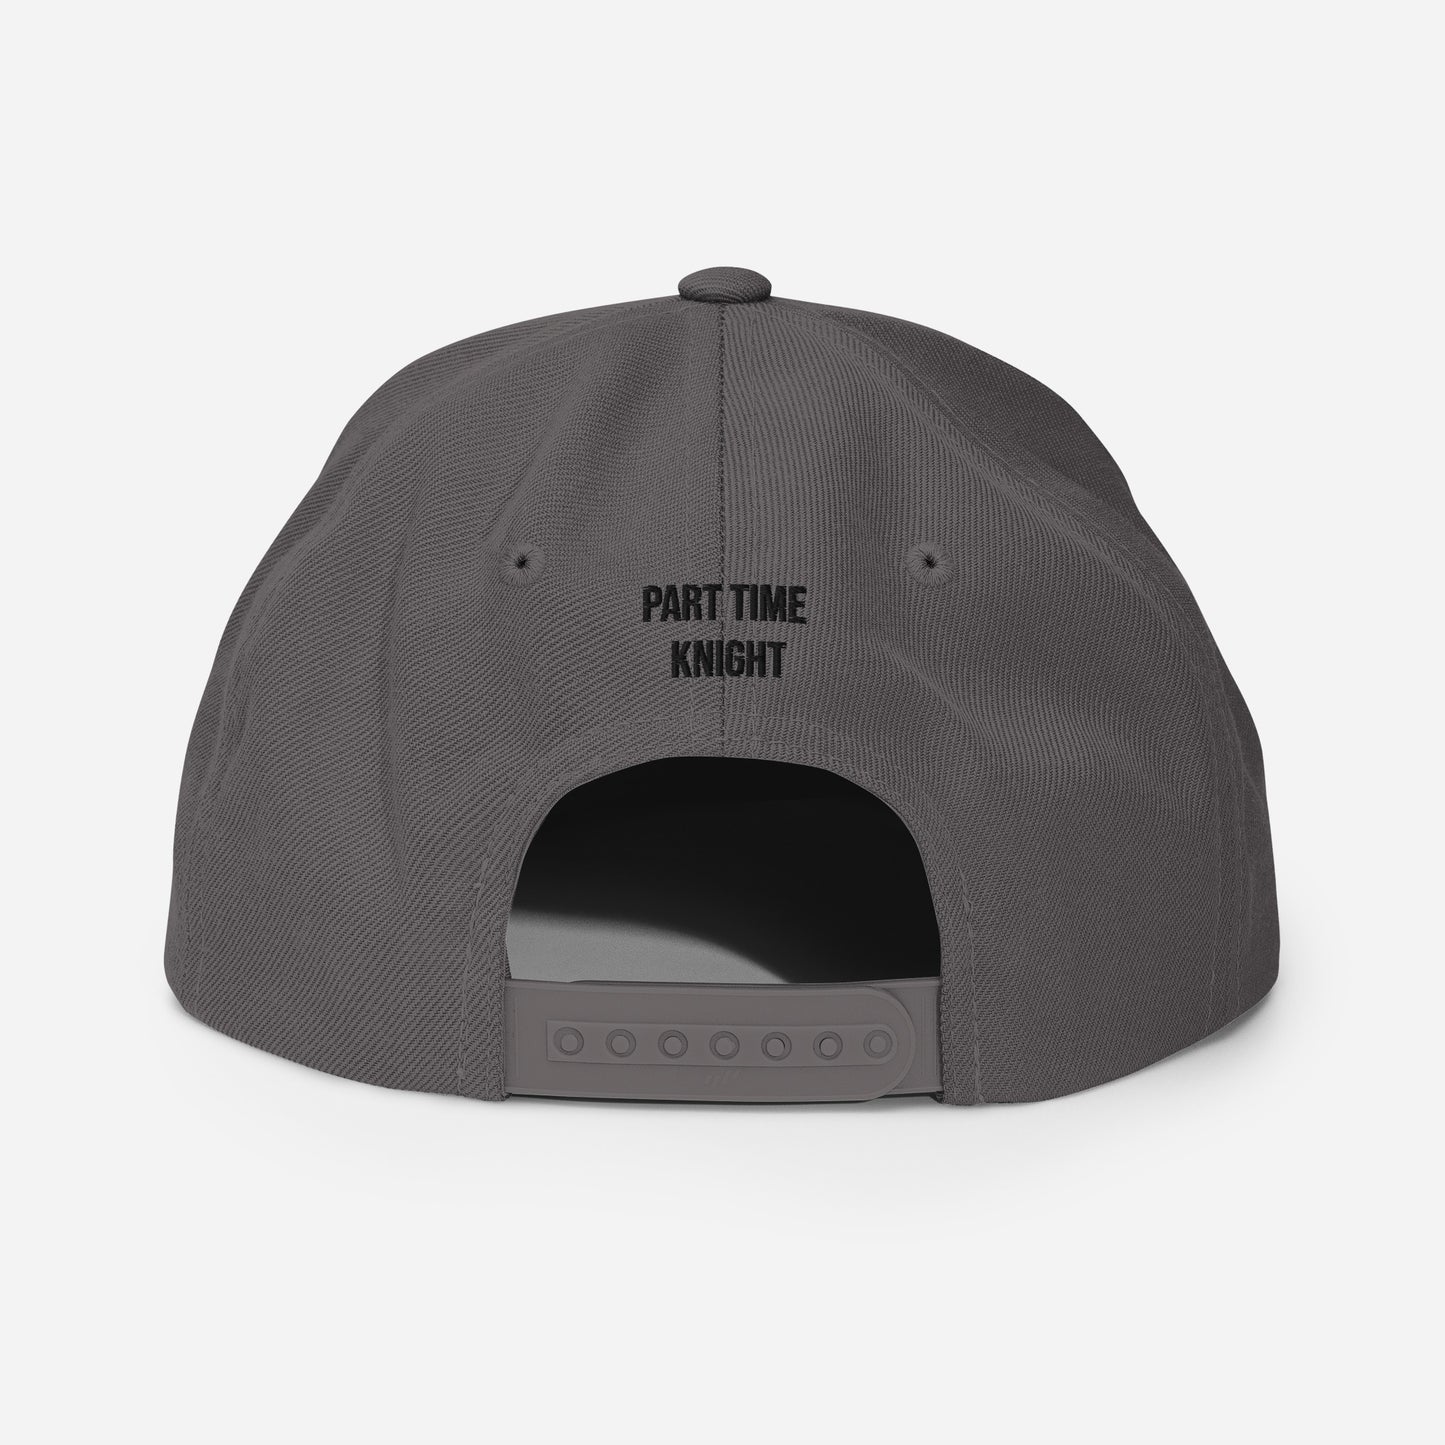 Part-Time Knight - Snapback Hat